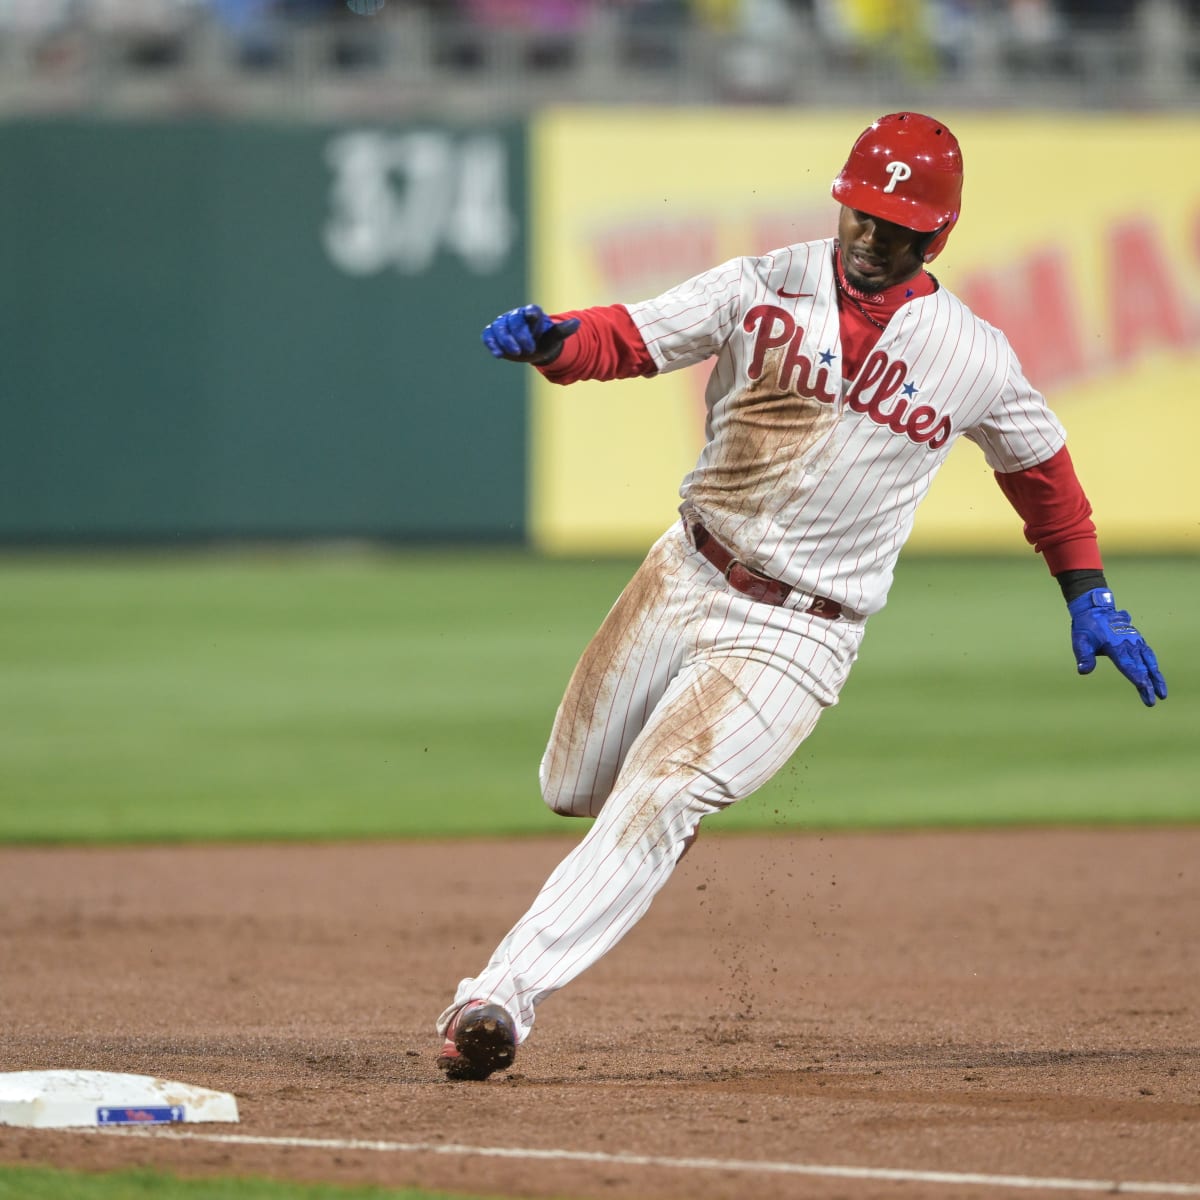 Phillies news and rumors 8/30: Jean Segura reportedly won't sign